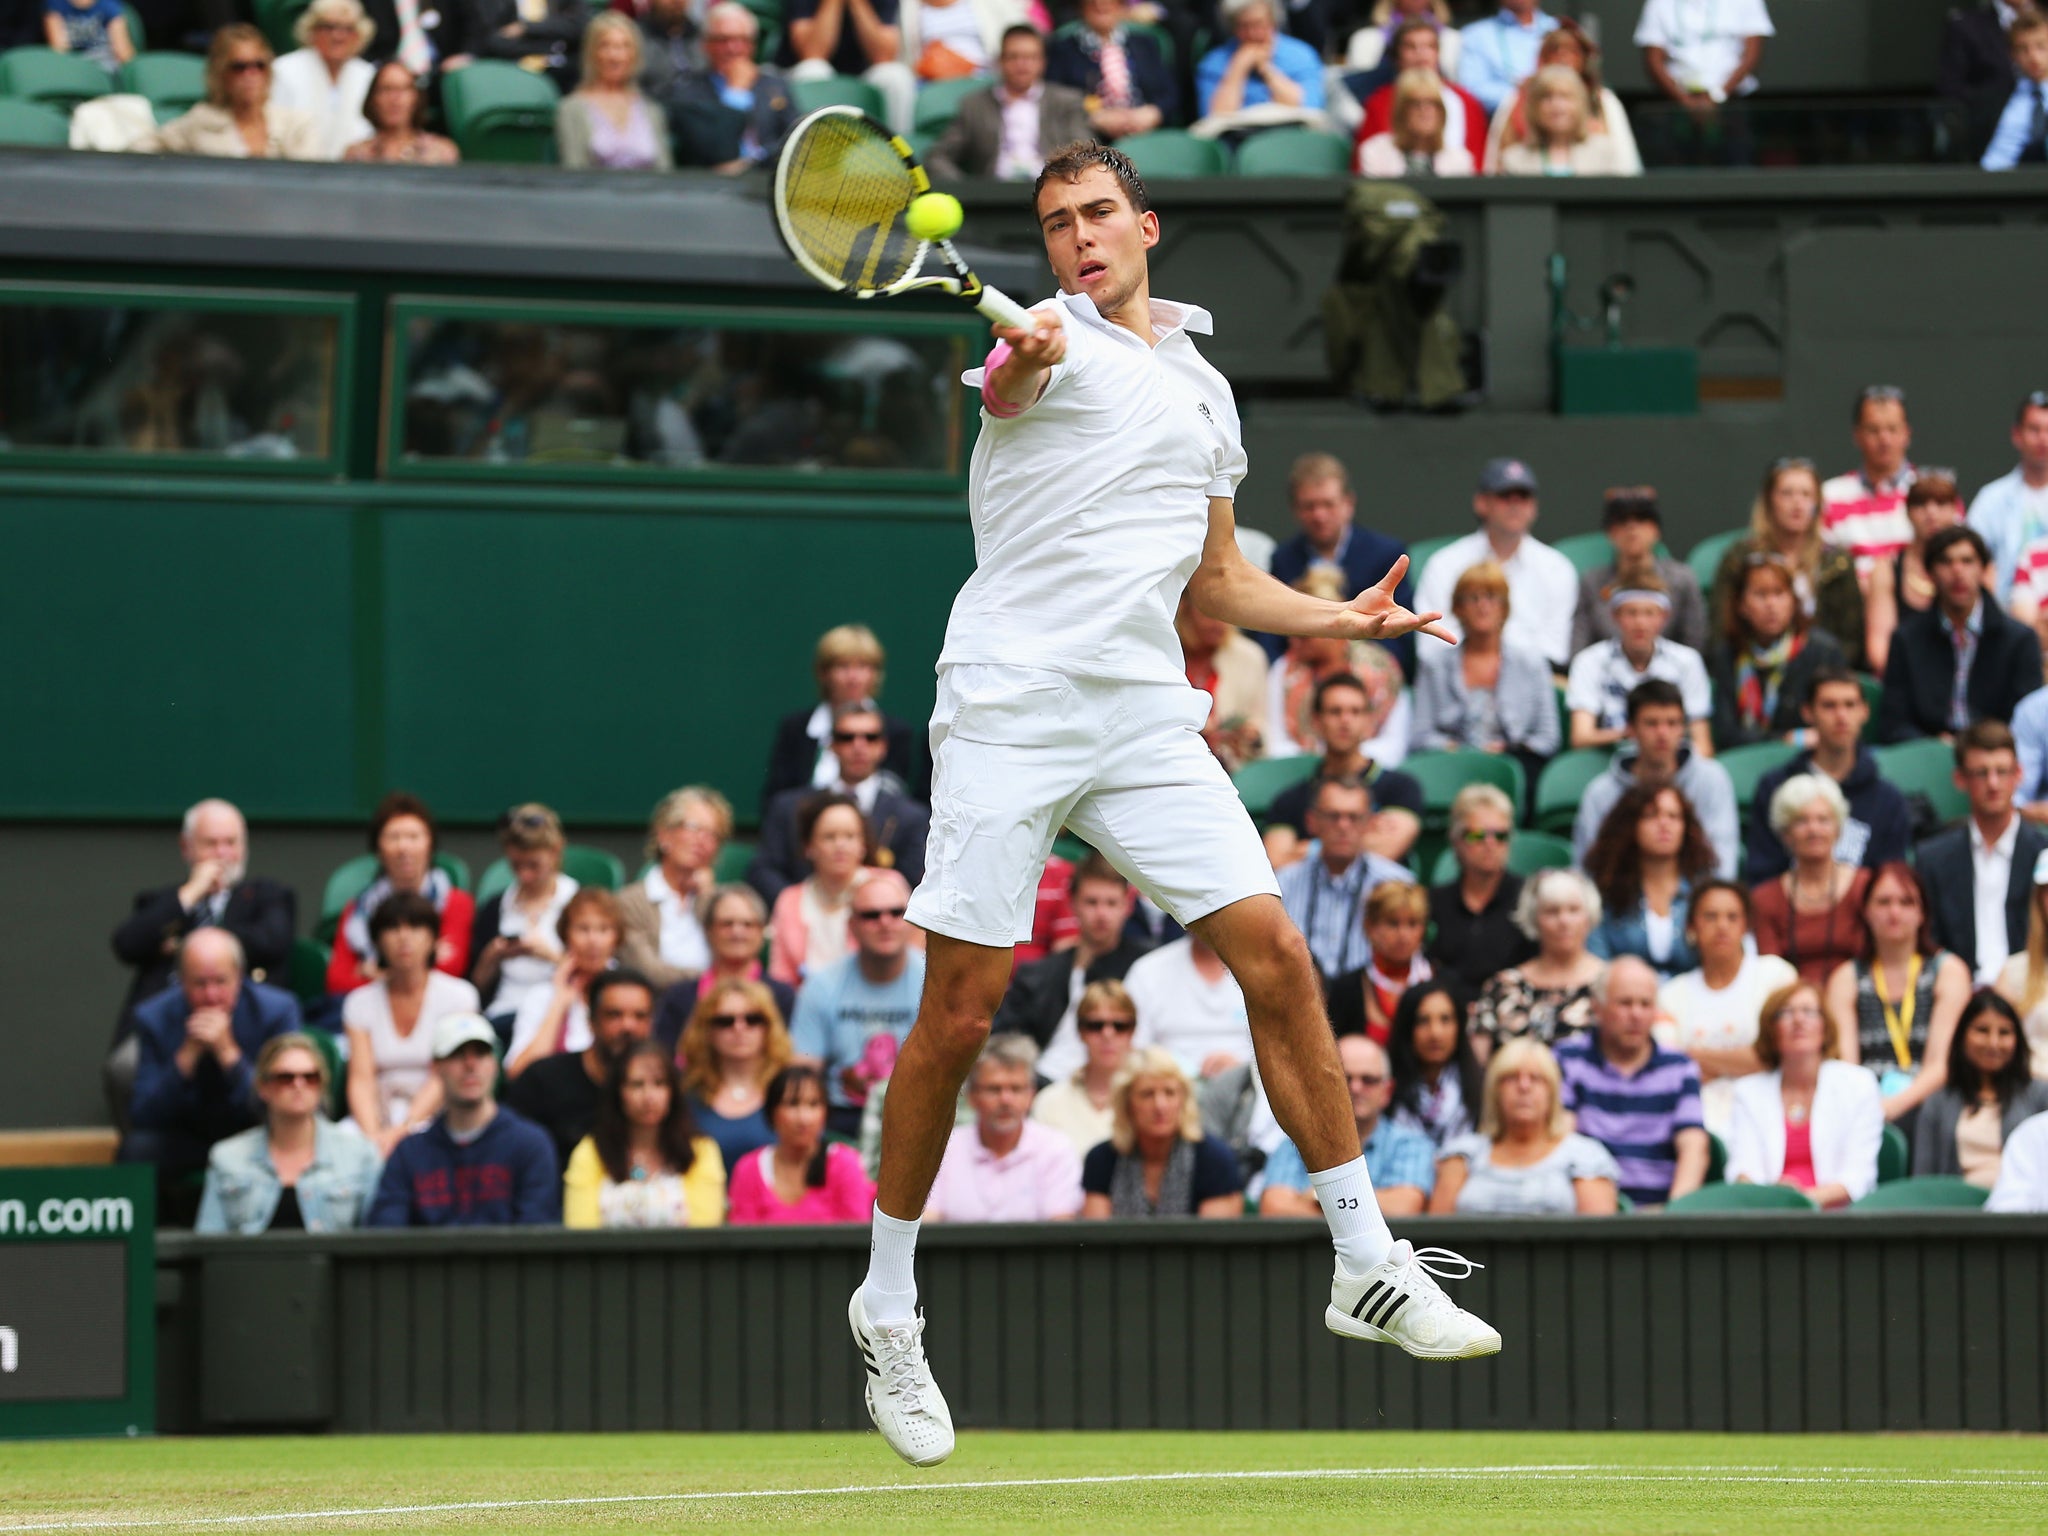 Jerzy Janowicz of Poland hits a forehand during the Gentlemens Singles third round match against Nicolas Almagro